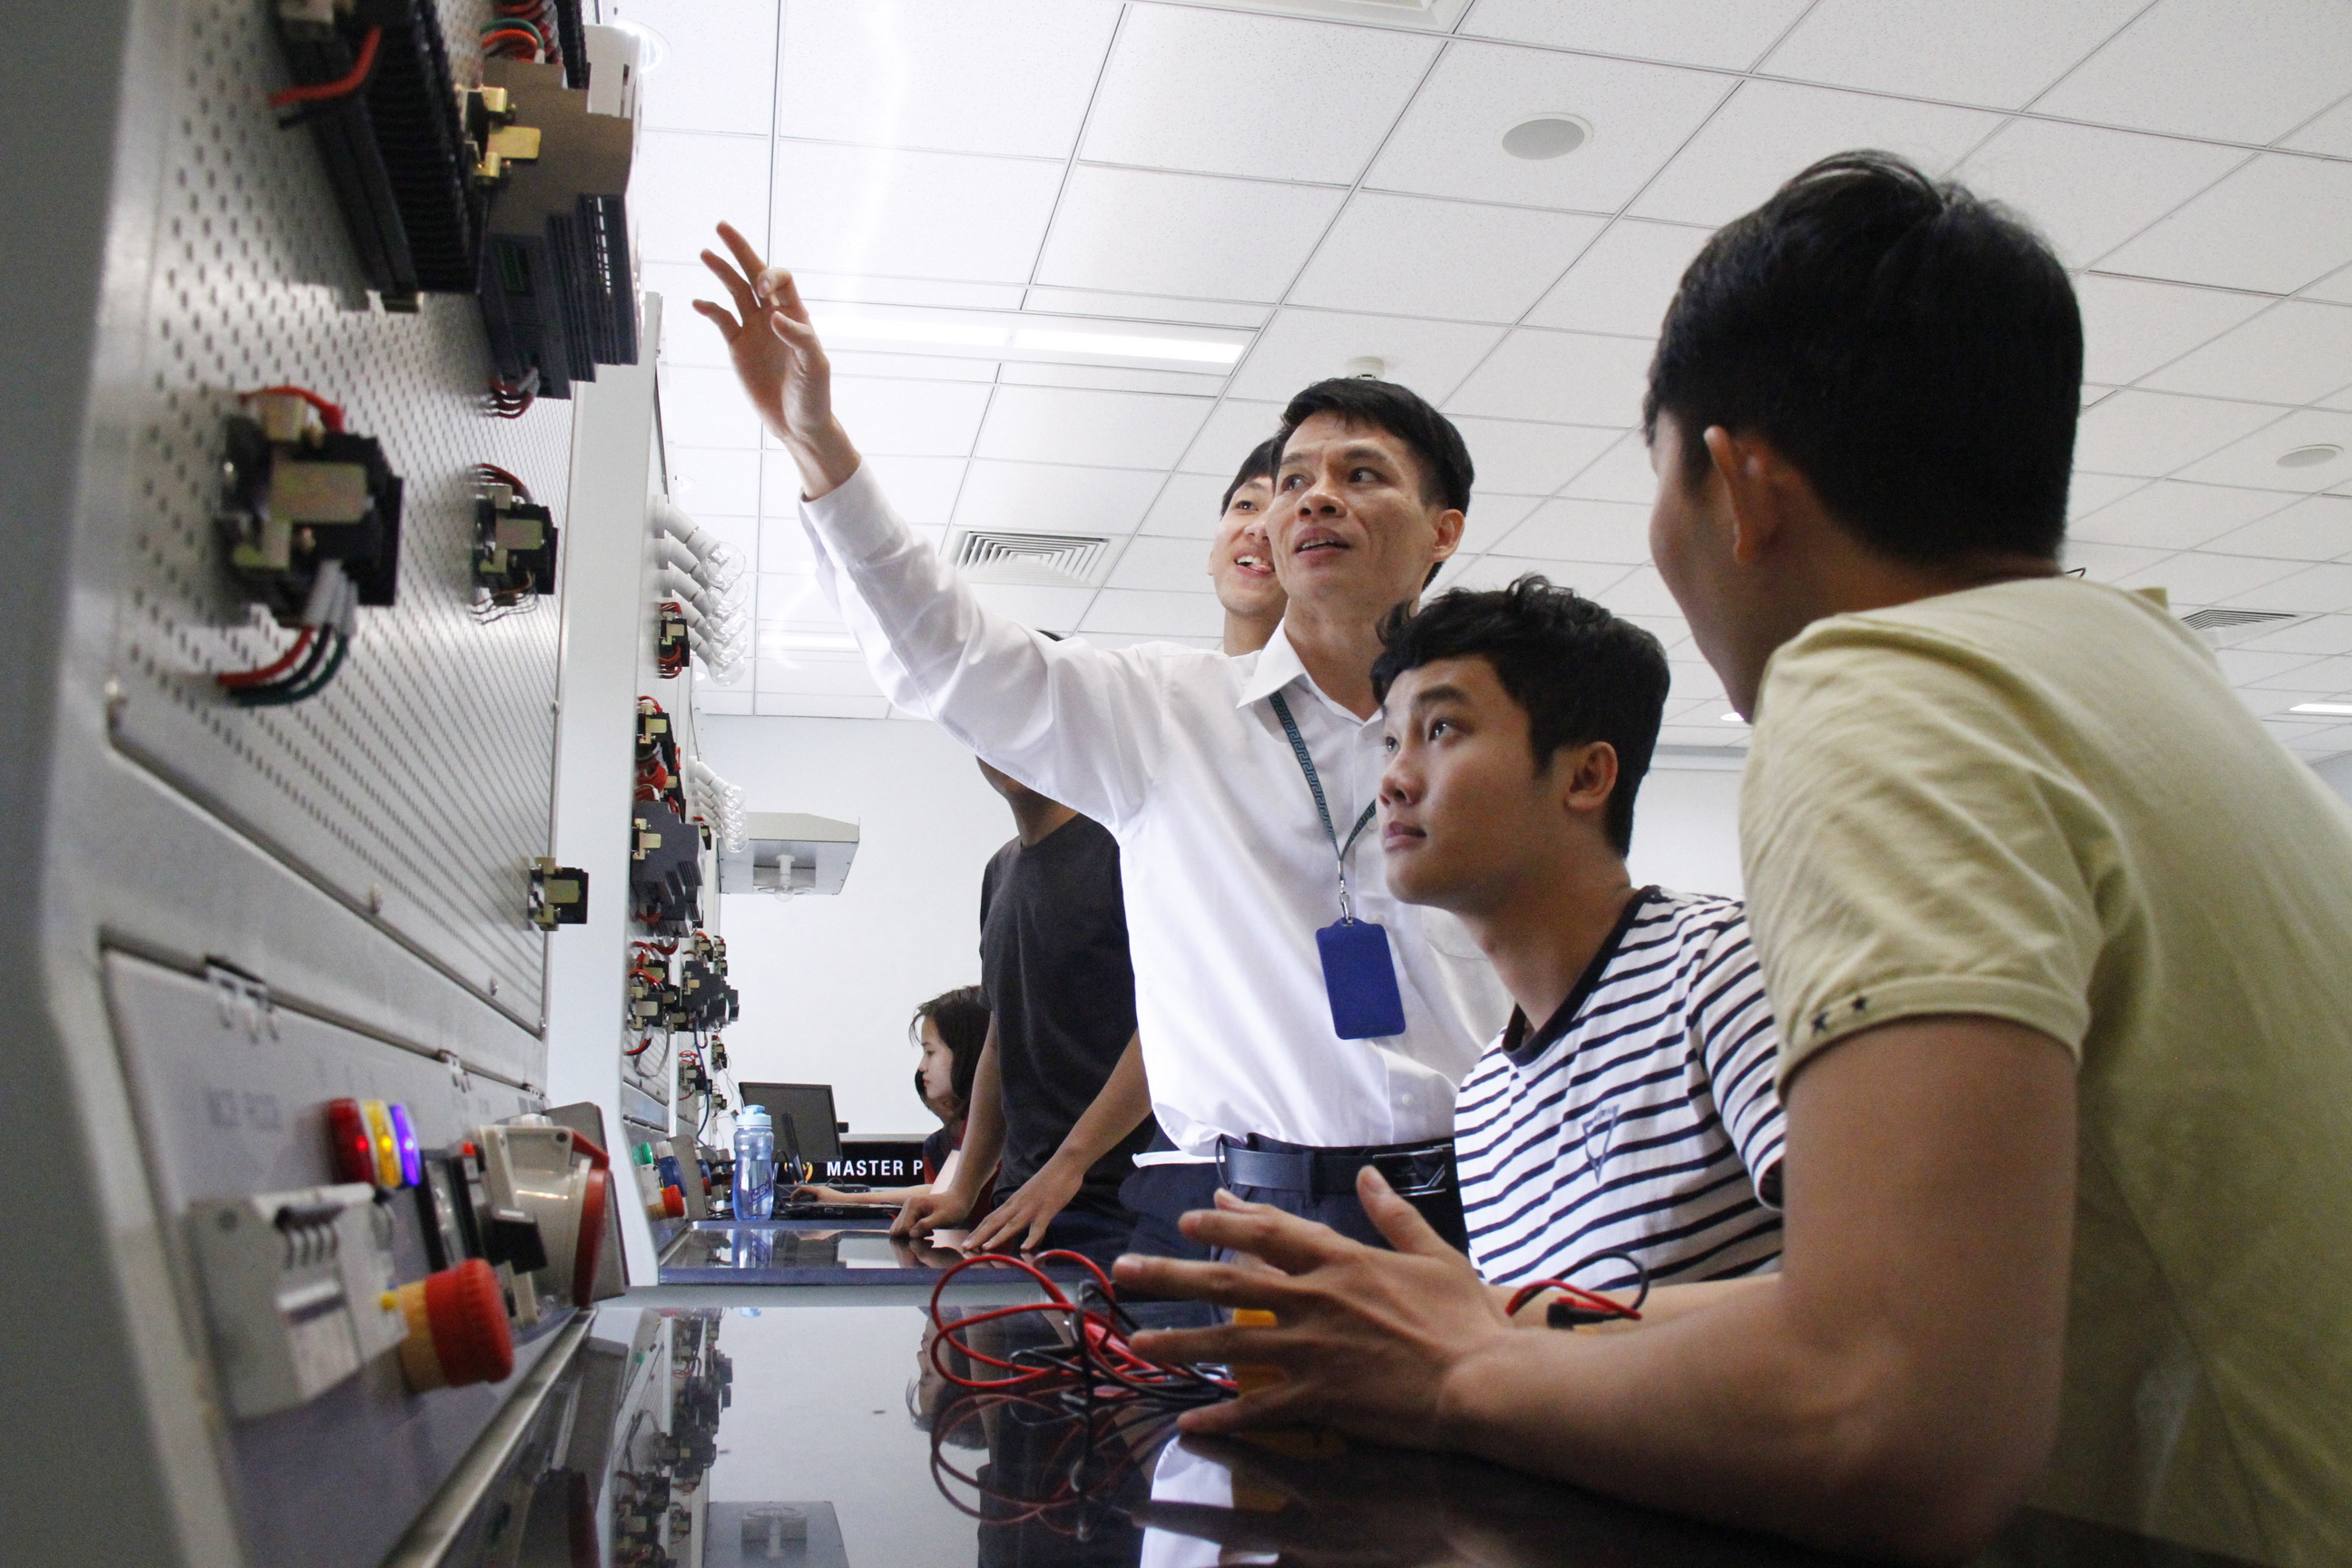 Students are seen at the lighting lab at the Eastern International University in Binh Duong, southern Vietnam. Photo: Tuoi Tre